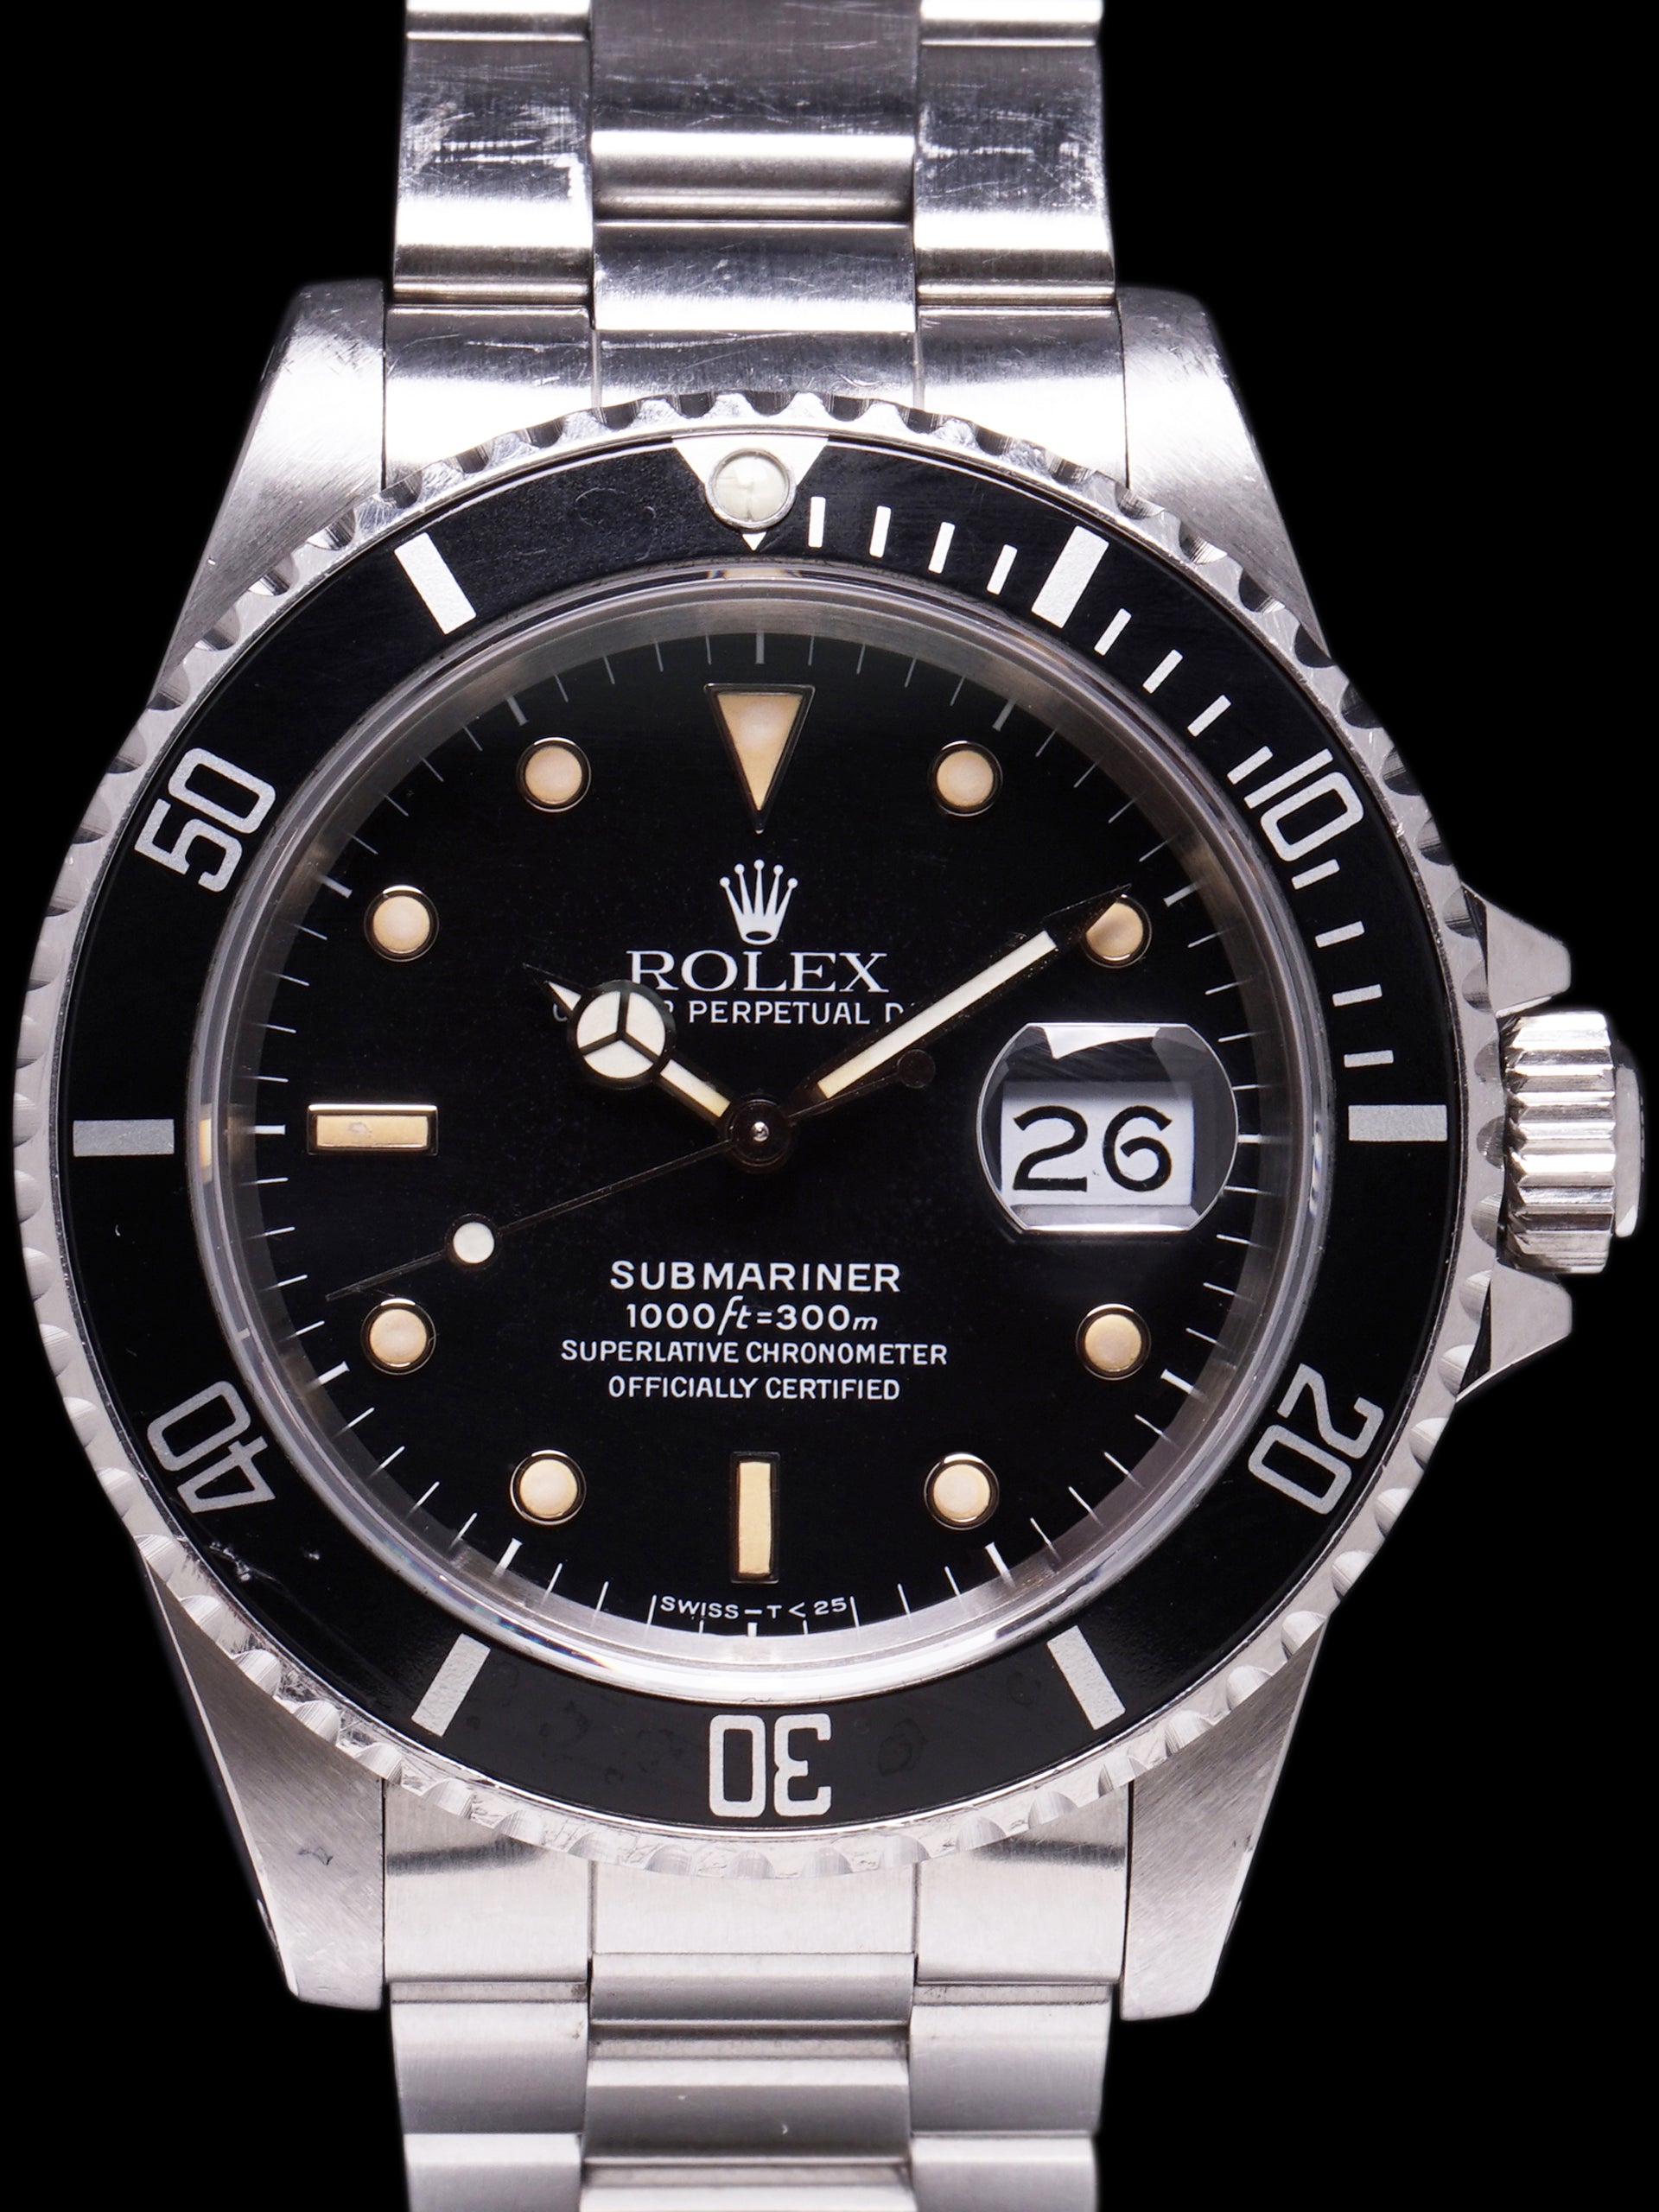 1989 Rolex Submariner (Ref. 16610) W/ Papers and Hangtags